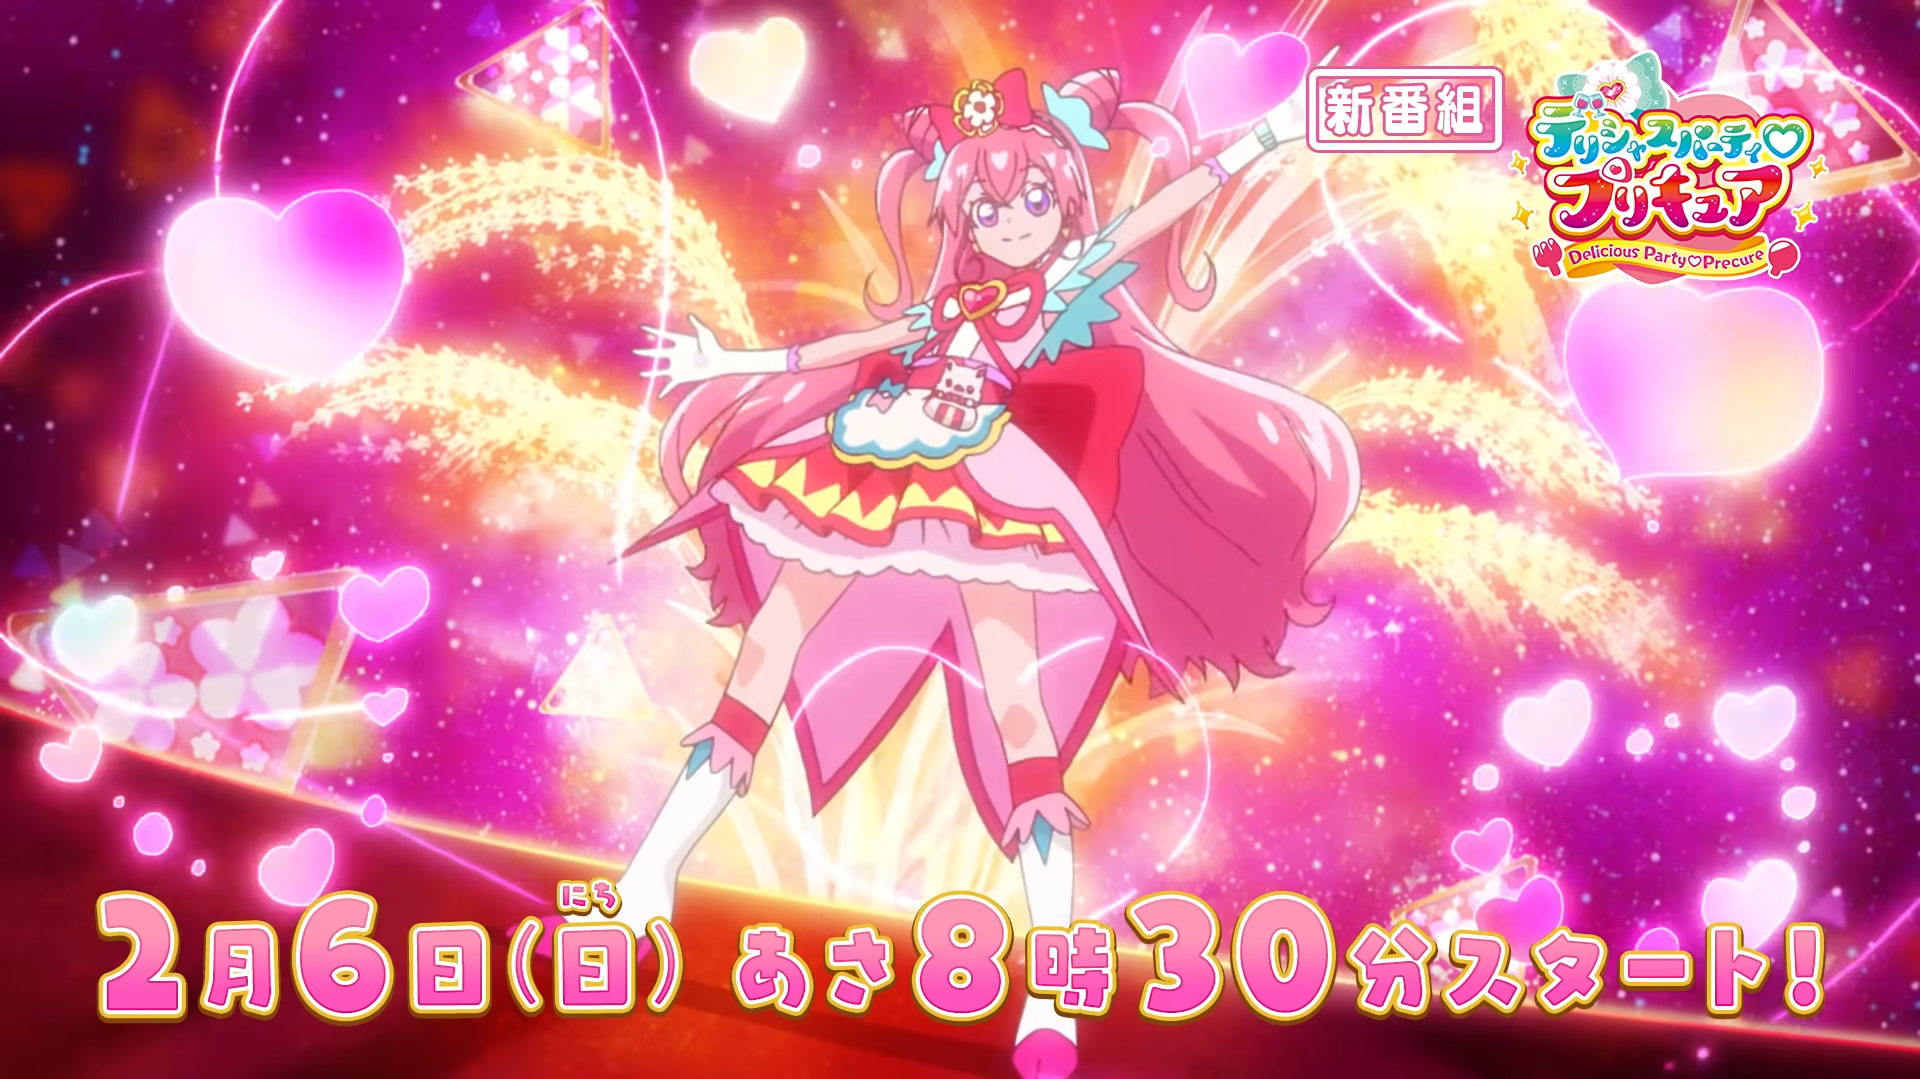 Delicious Party Precure Premieres February Cast Members Revealed